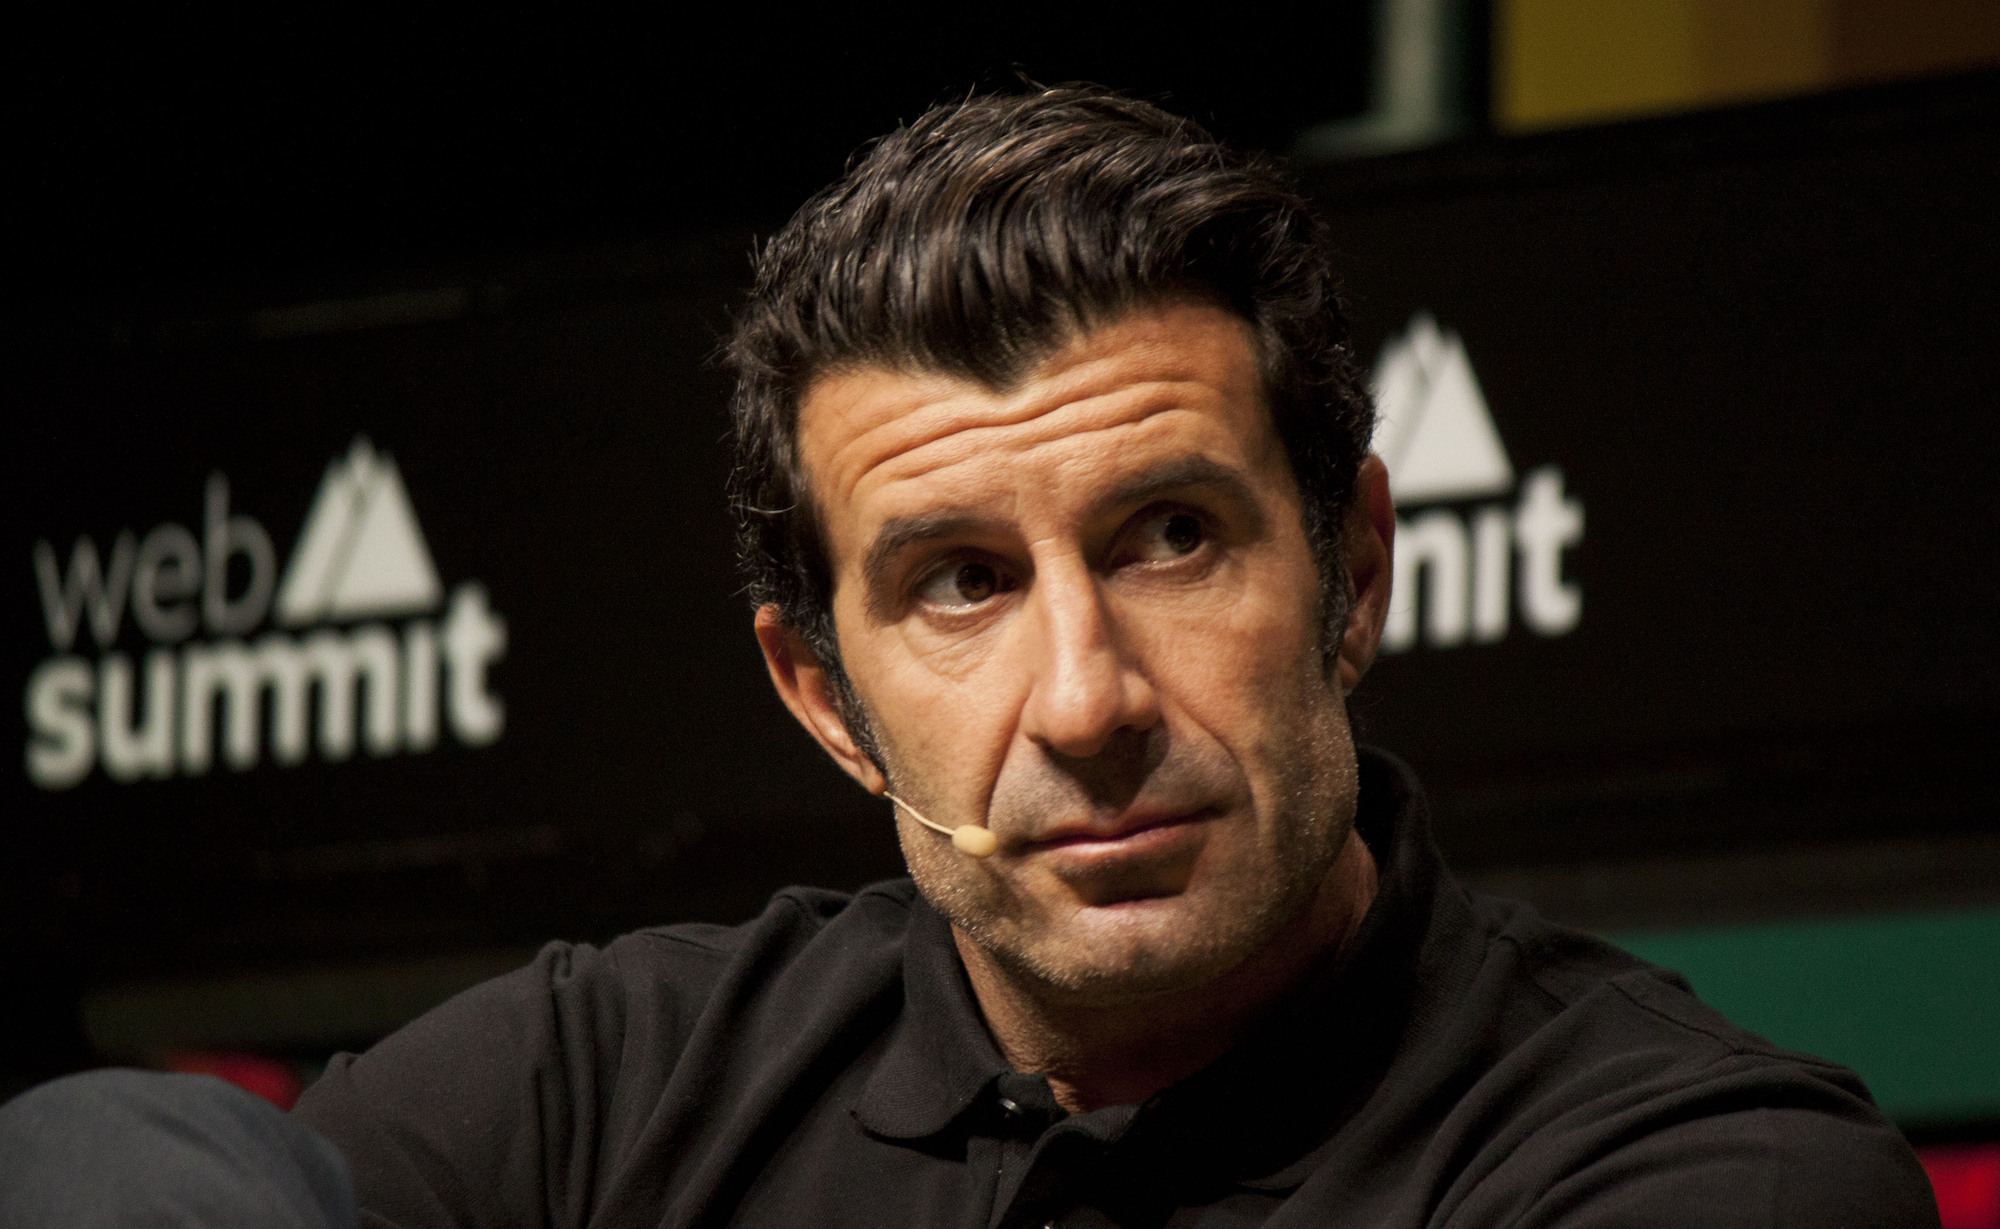 Luís Figo will attend this weekend’s sports collectibles event at the Venetian Macao